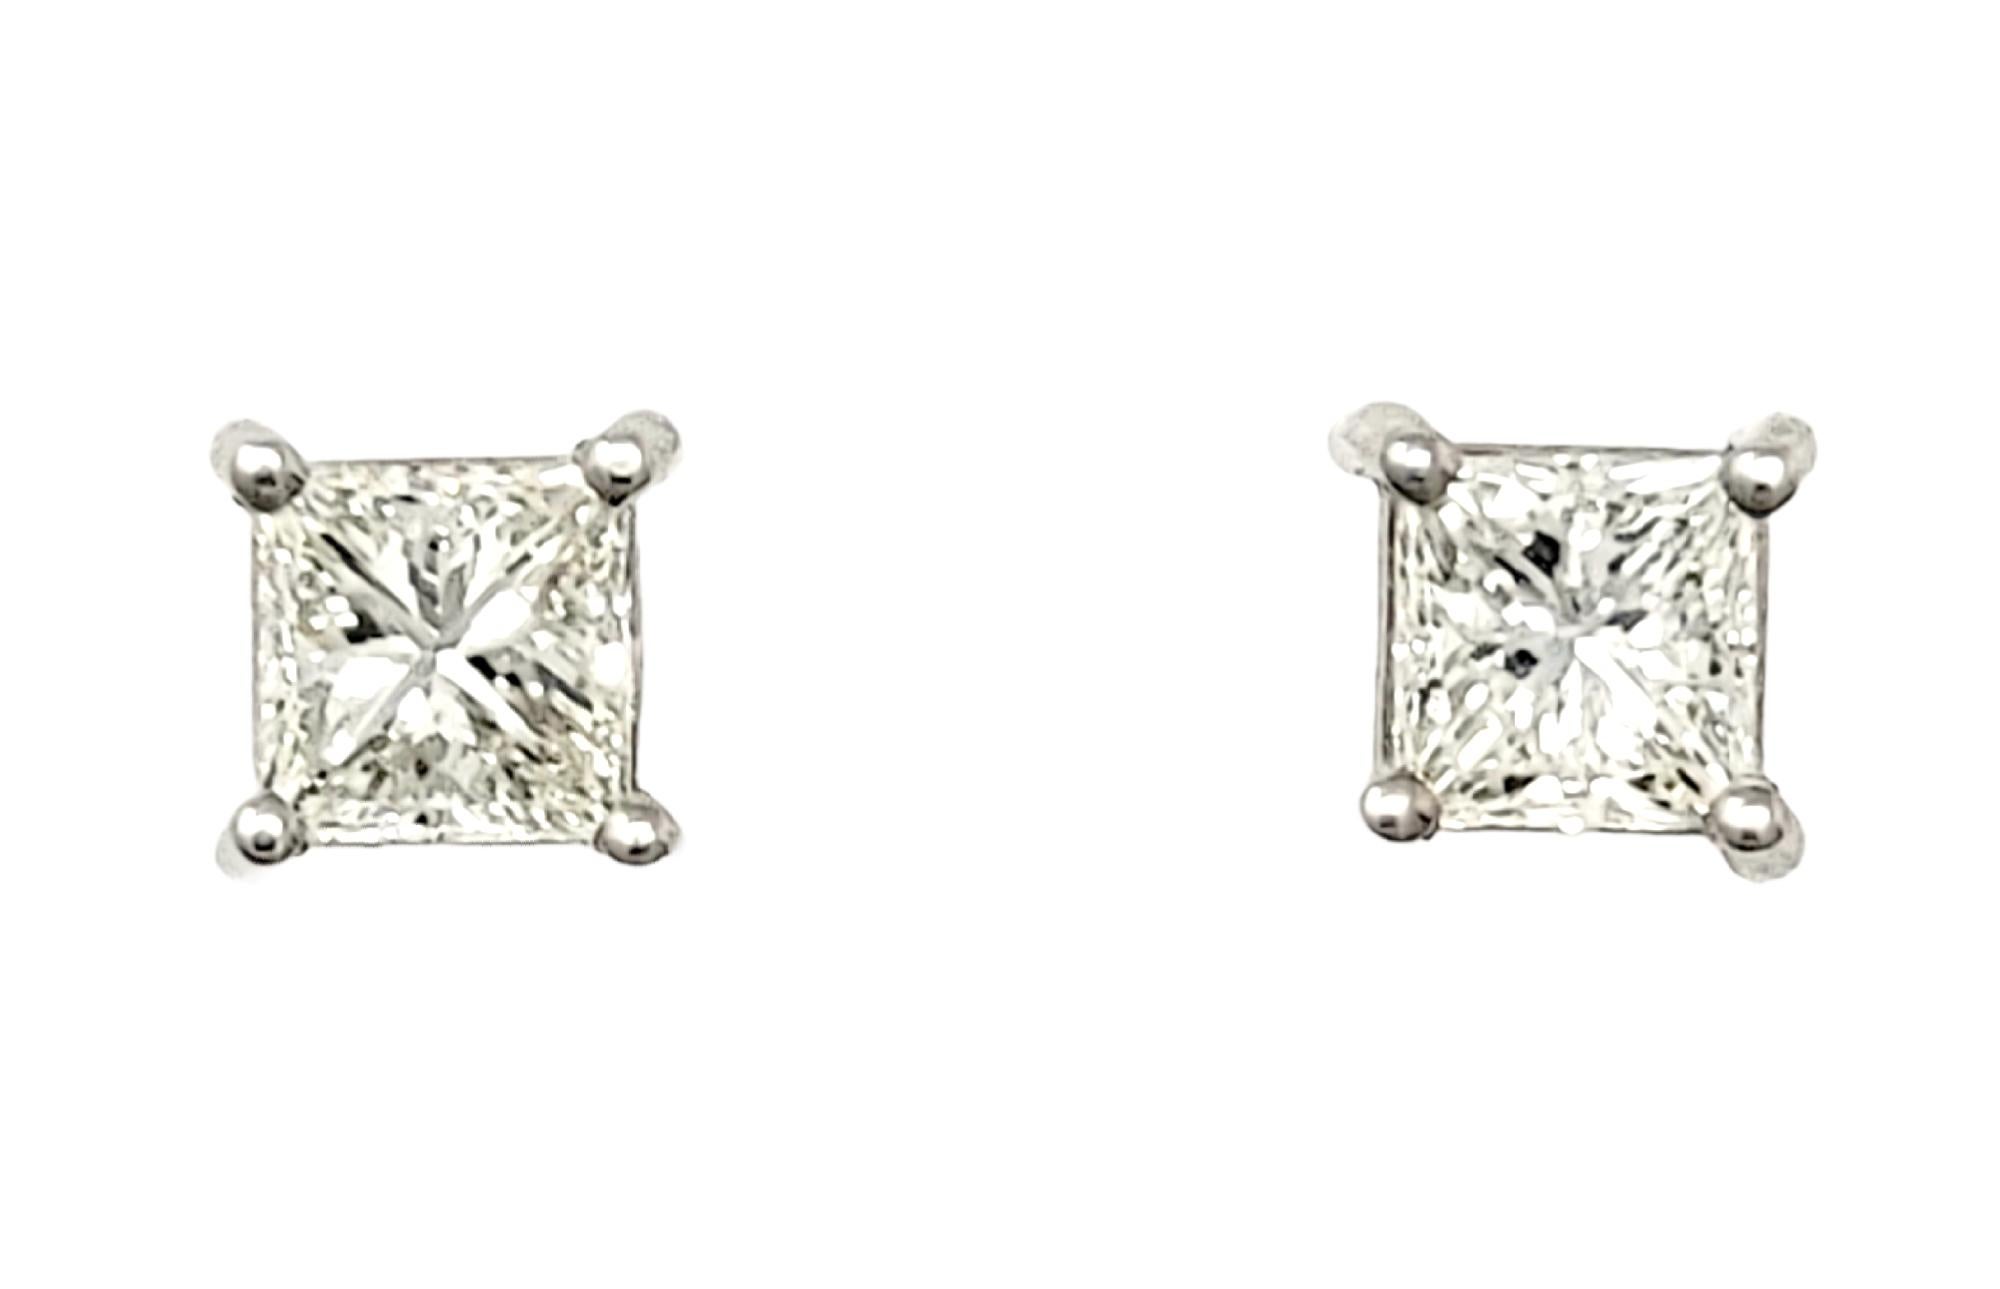 These timeless diamond solitaire stud earrings will become your new everyday earrings! These gorgeous square diamond and white gold studs are the epitome of minimalist elegance. They have a simple yet elegant design can be worn with just about